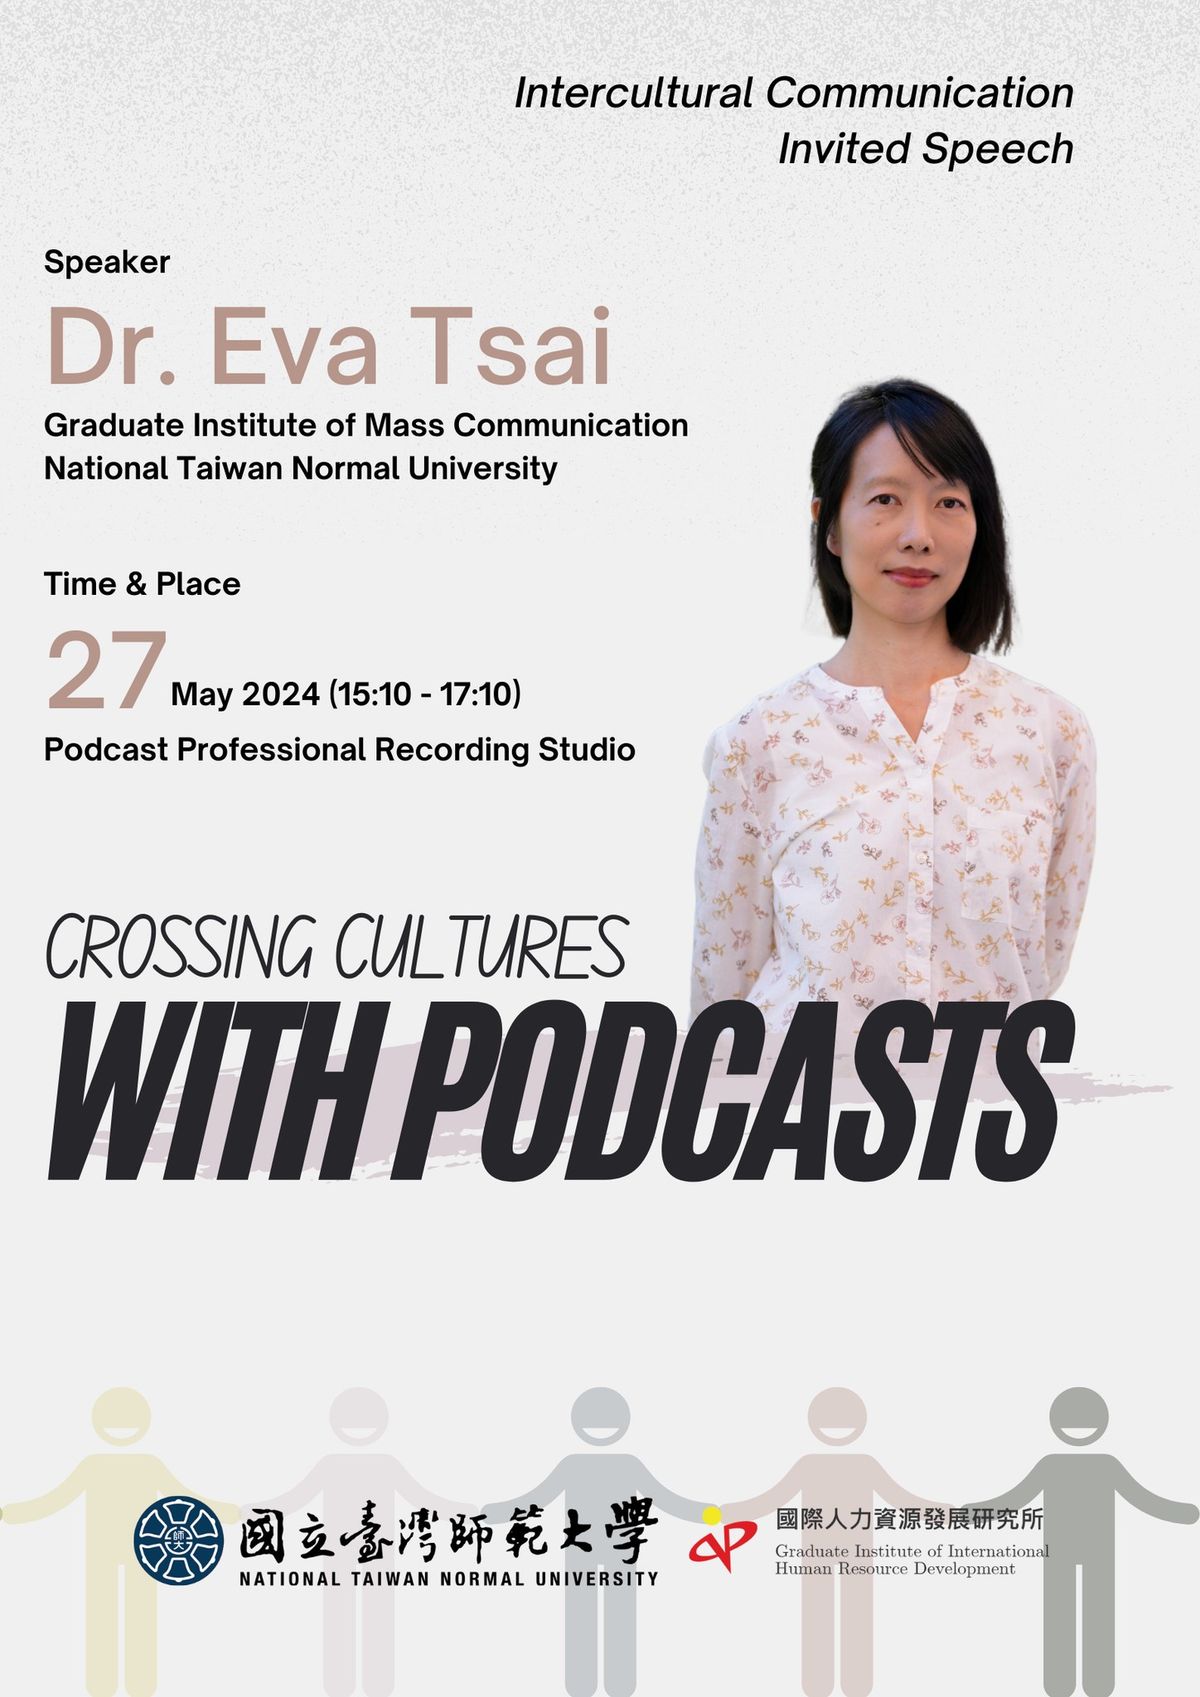 Crossing Cultures With PODCASTS